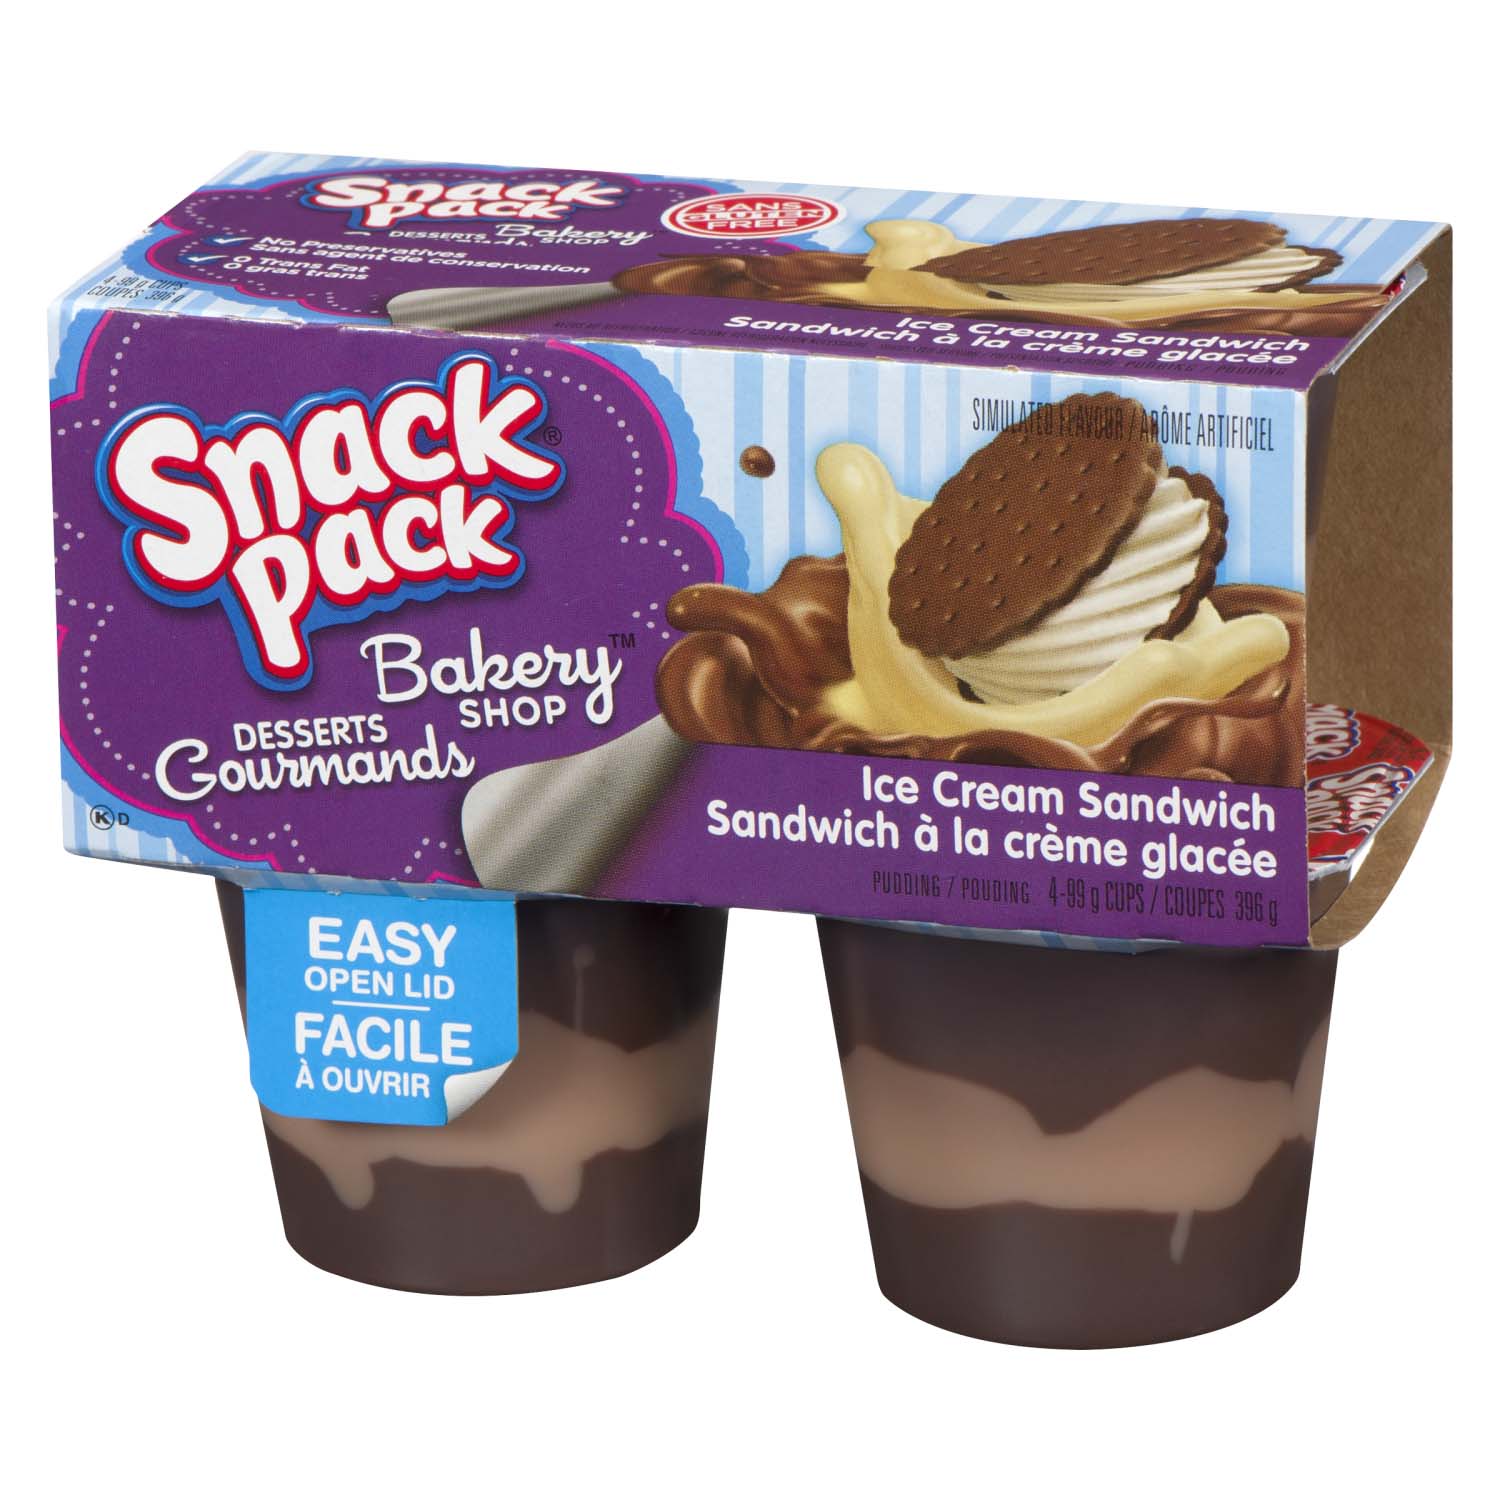 Snack Pack Bakery Shop Pudding Ice Cream Sandwich 4 Cups x 99